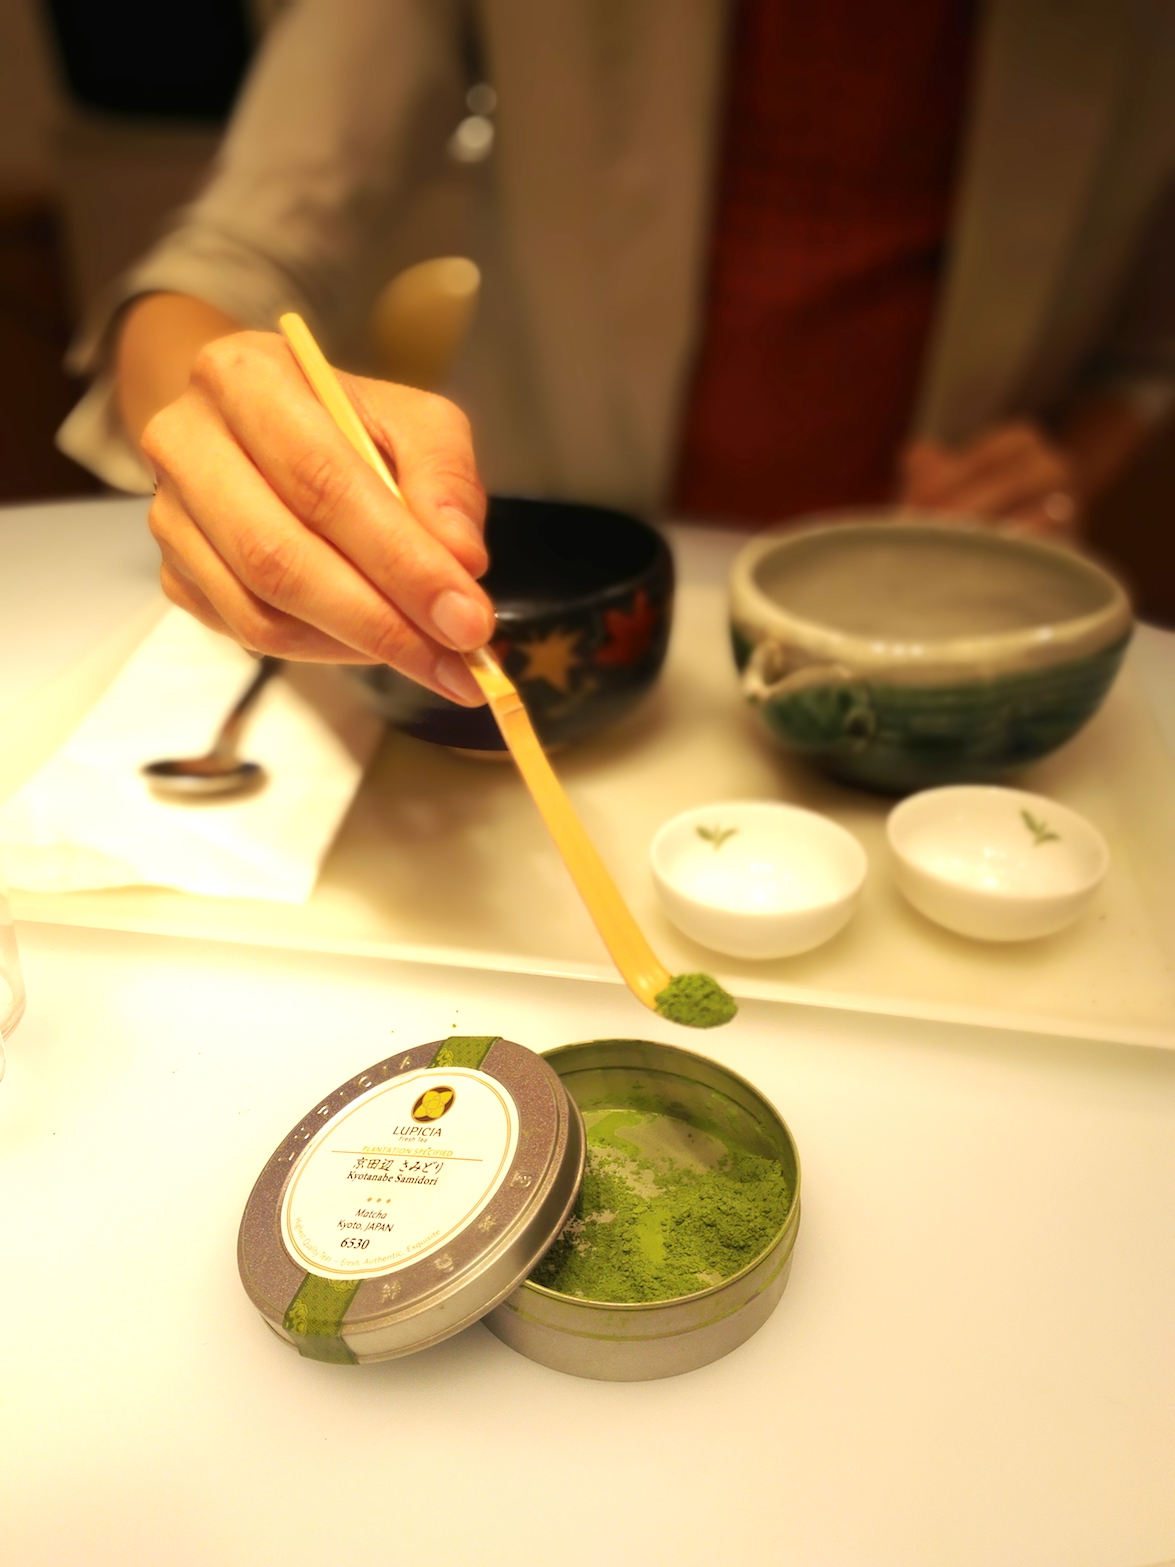 Using the special spoon to scoop the matcha tea 